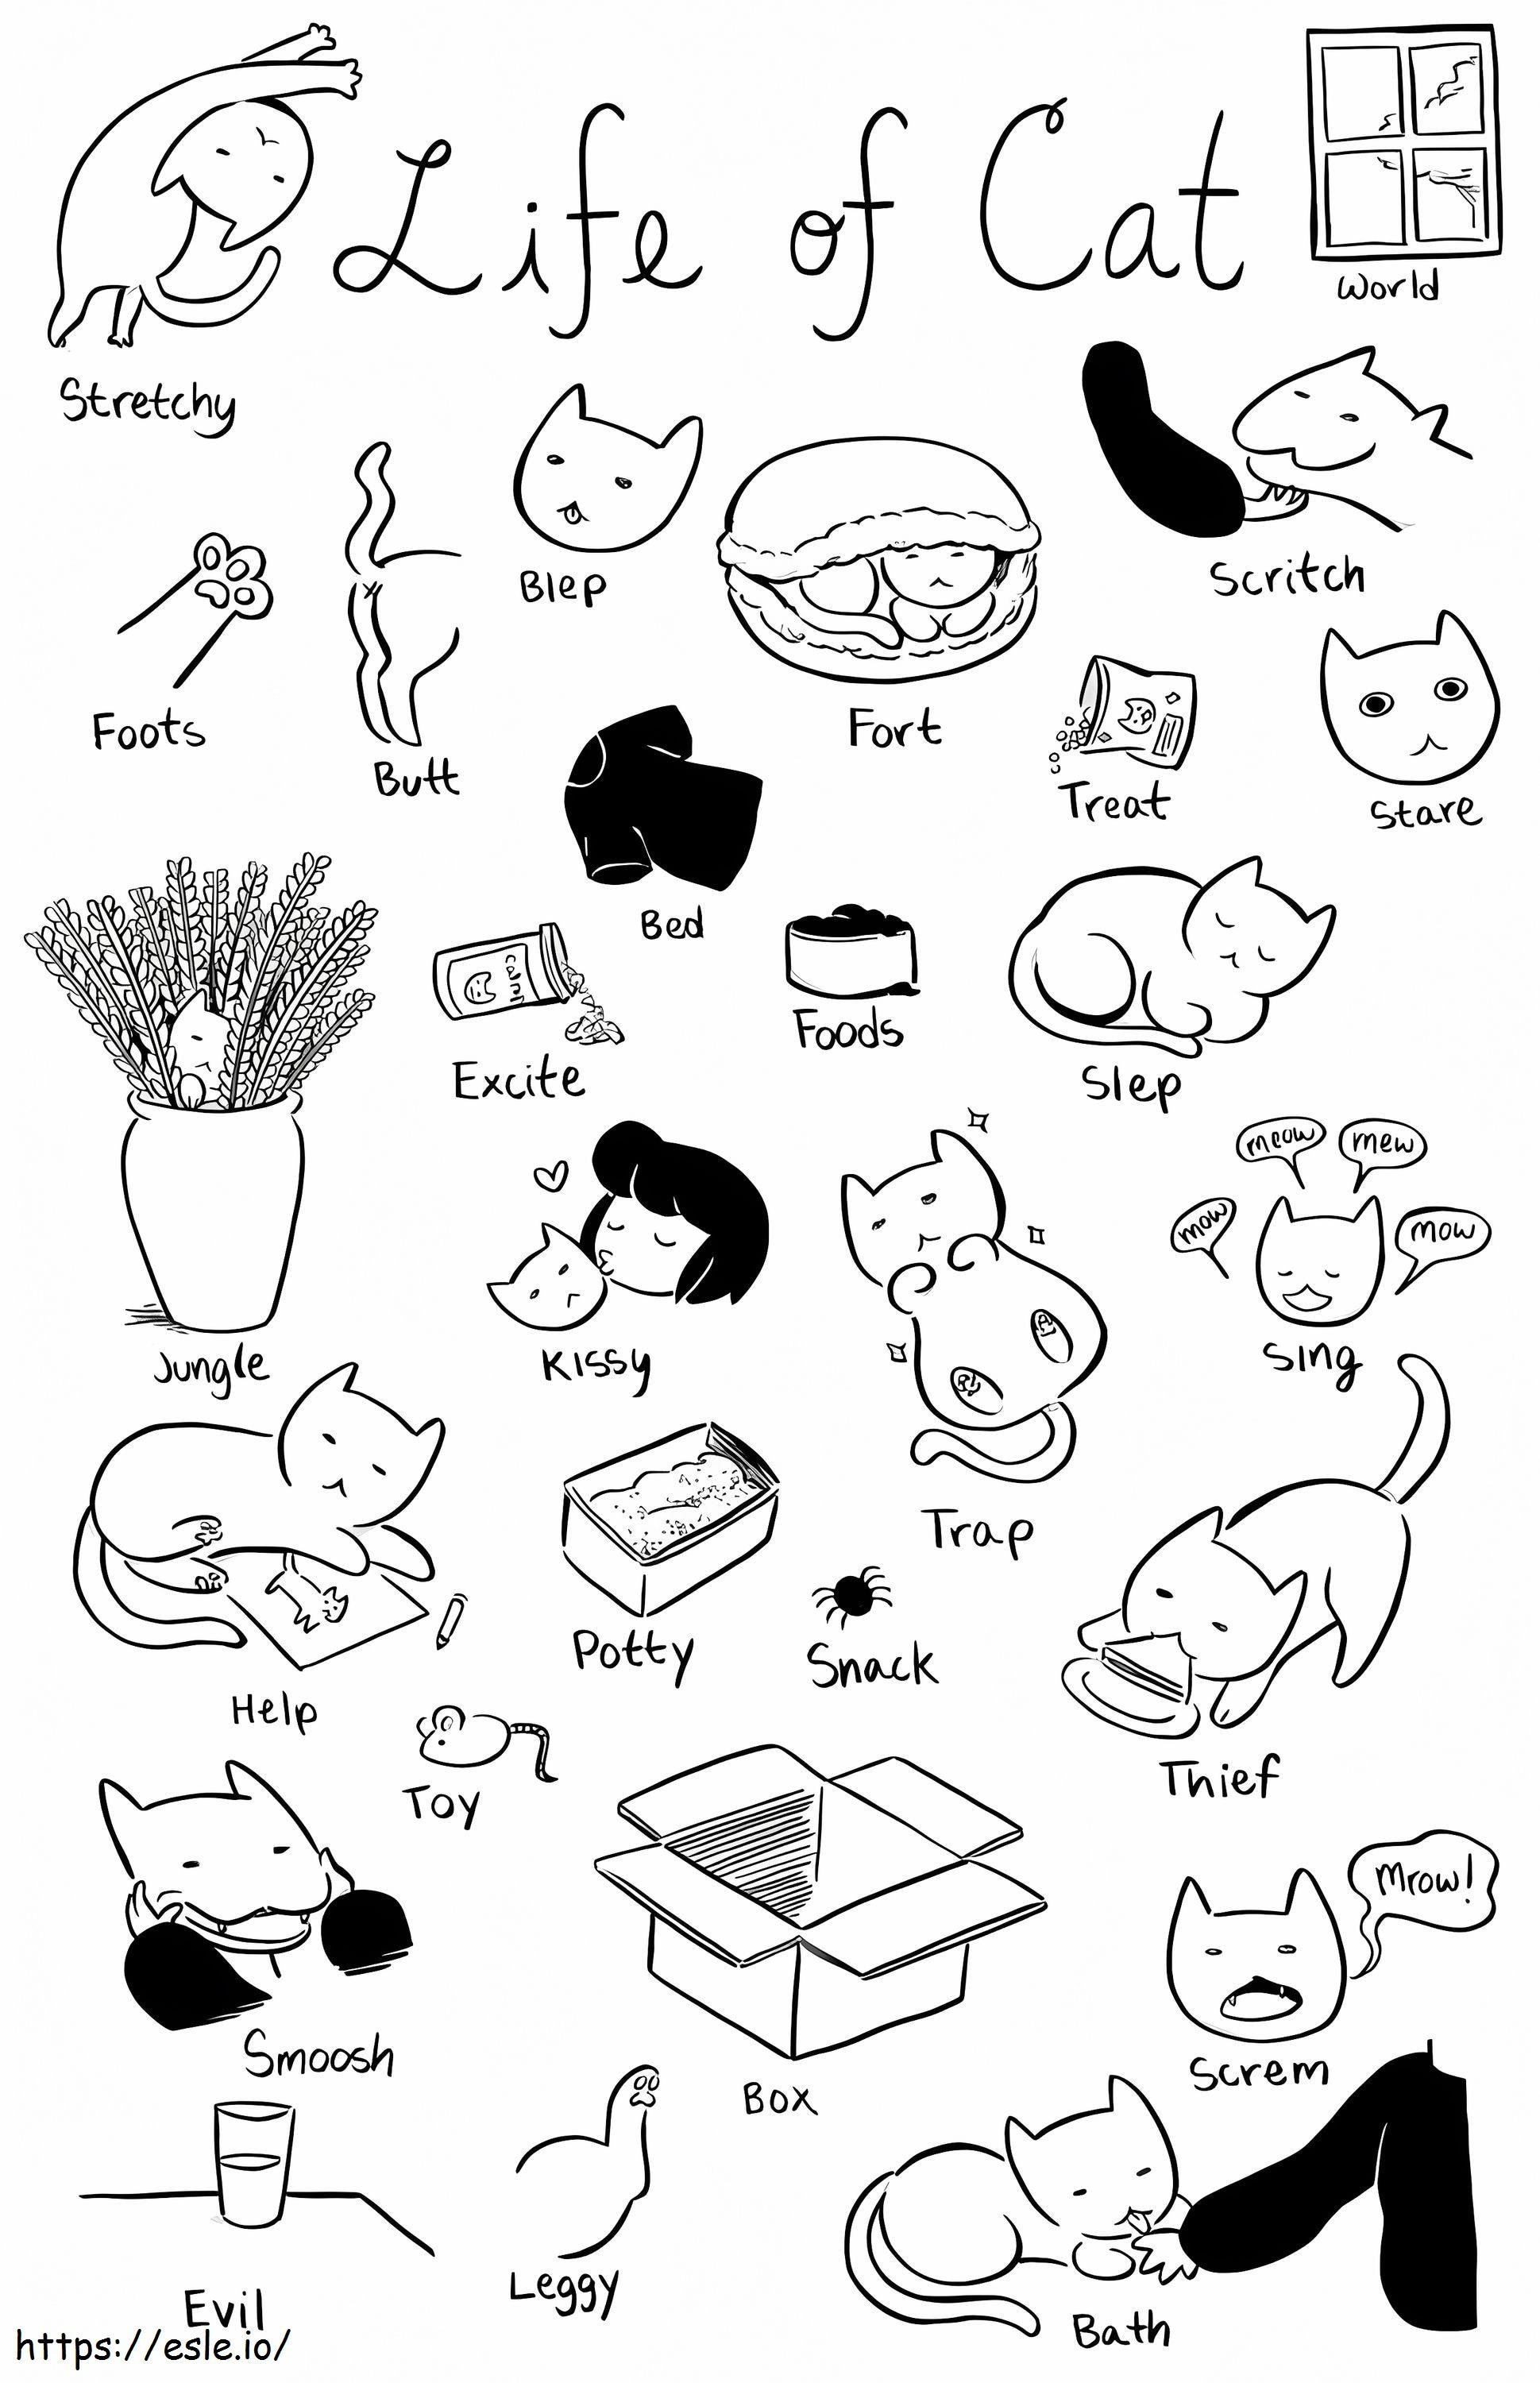 Kitten Aesthetic coloring page